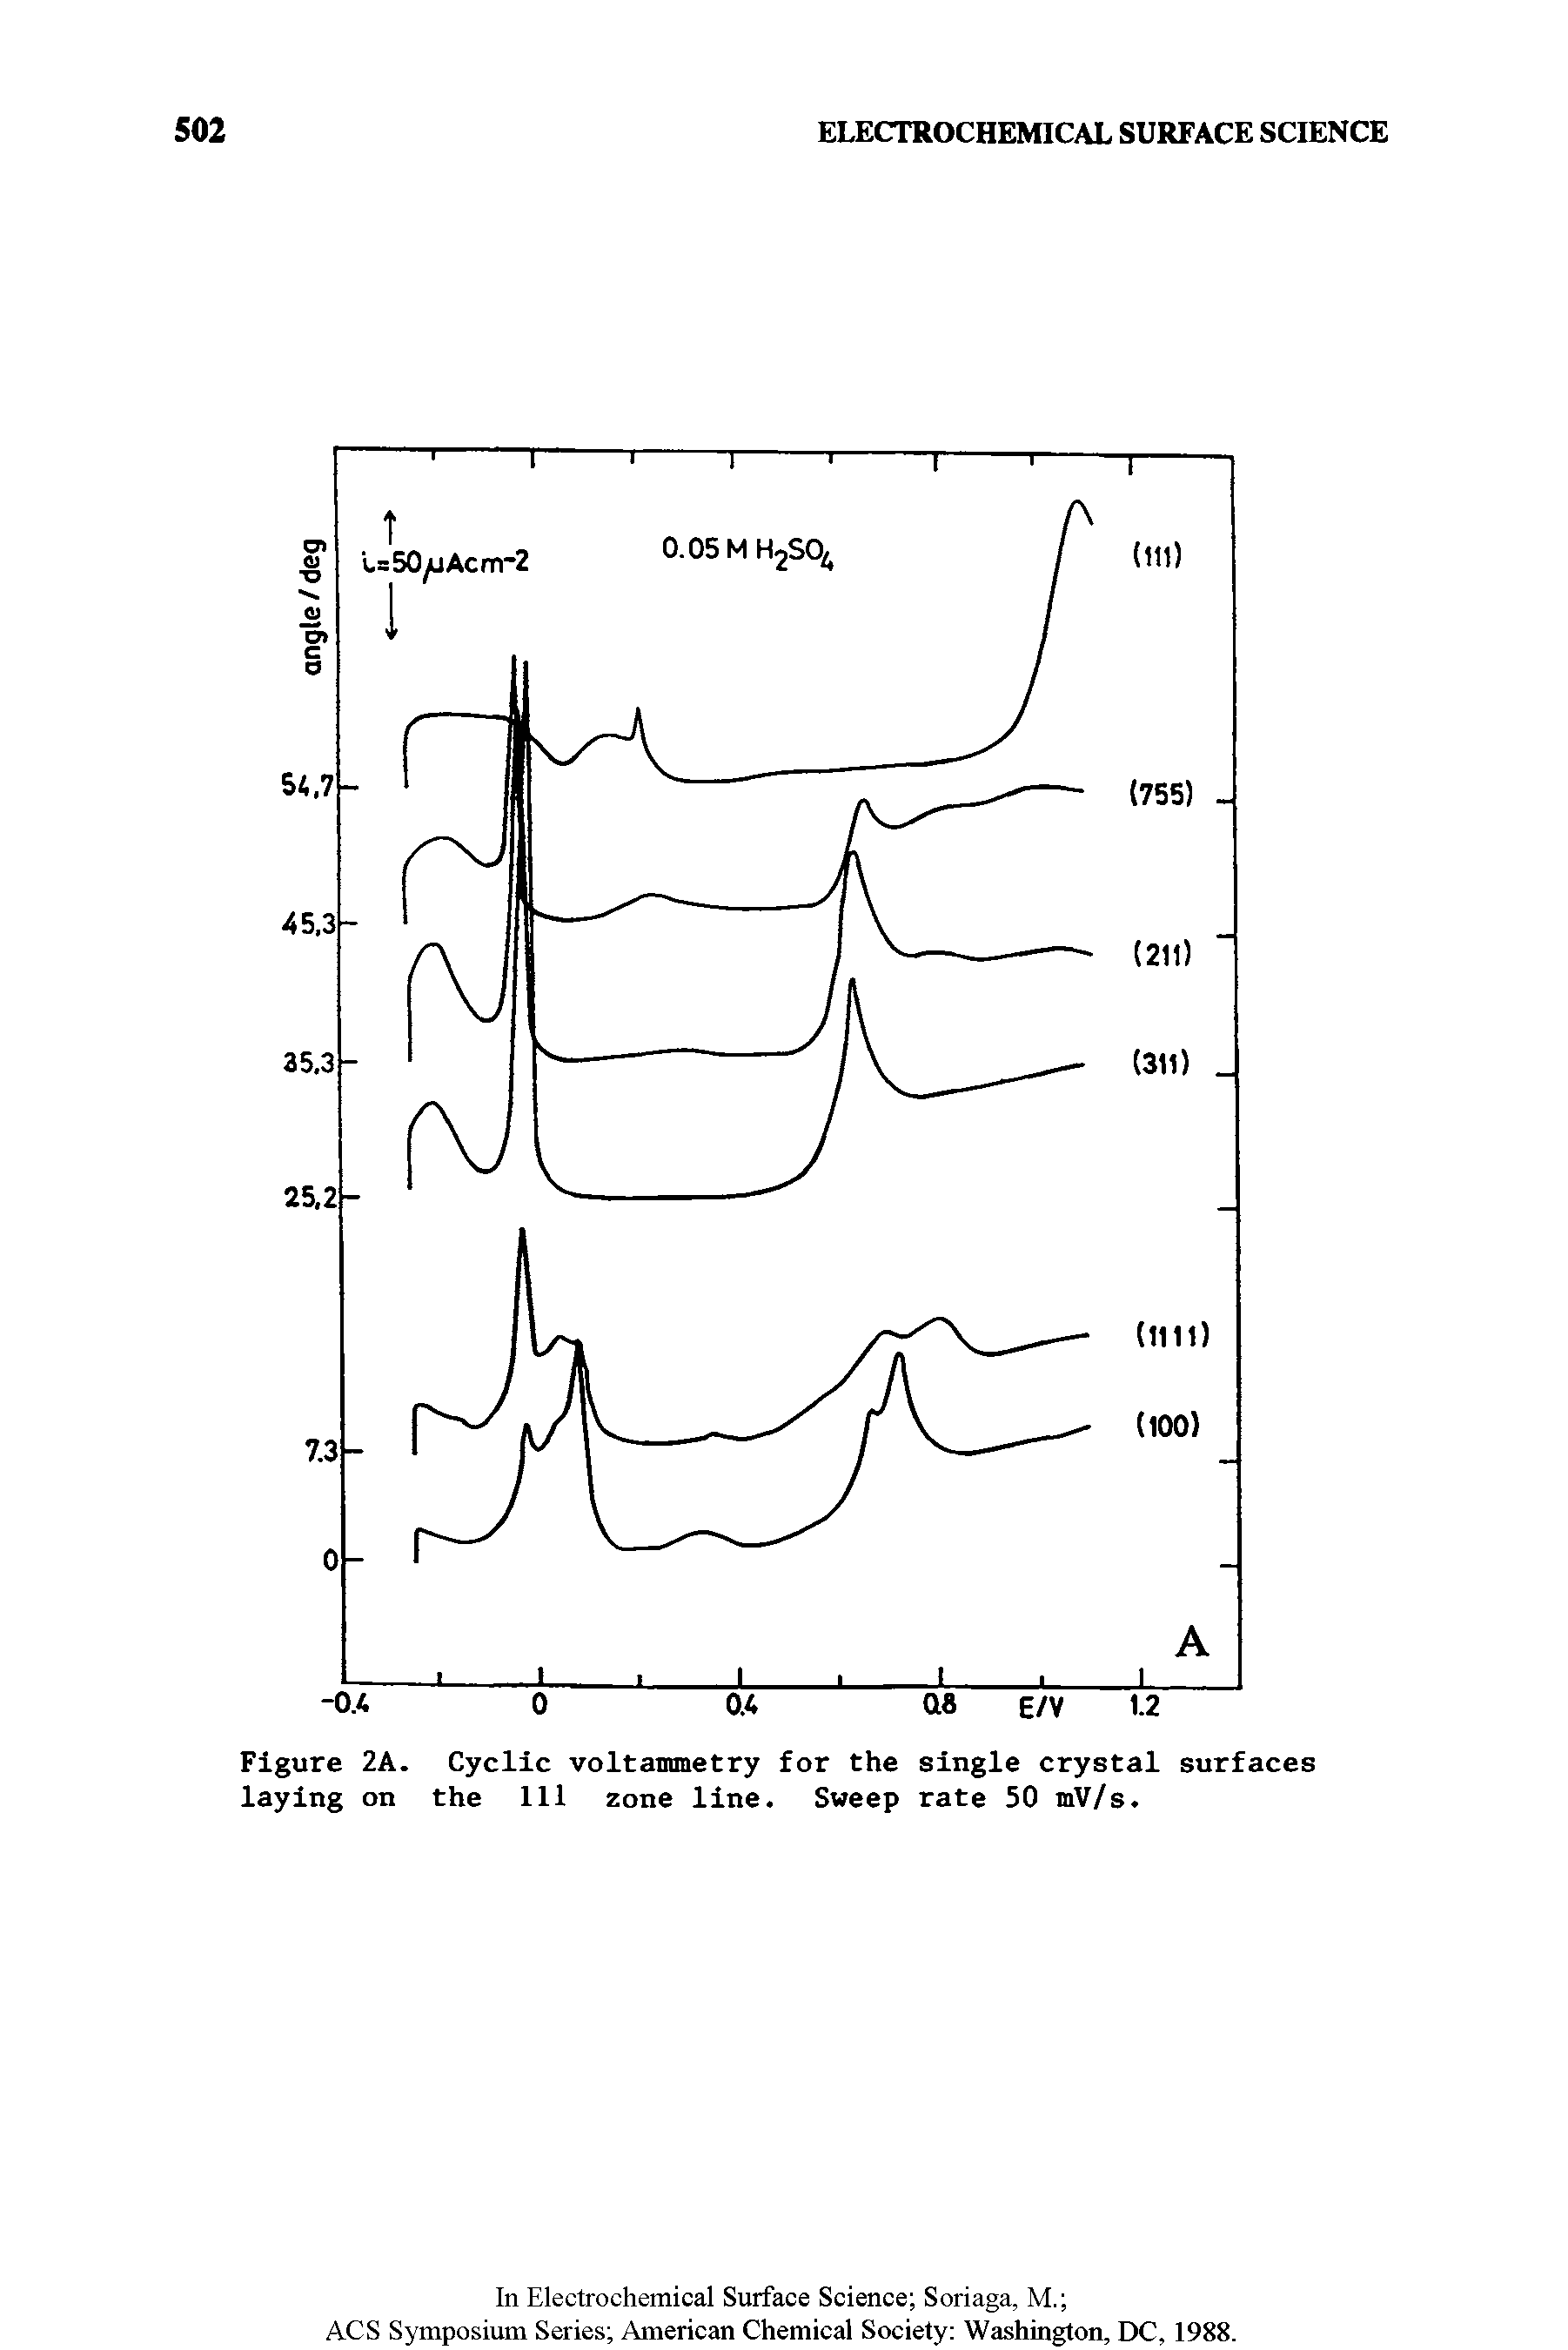 Figure 2A. Cyclic voltammetry for the single crystal surfaces laying on the 111 zone line. Sweep rate 50 mV/s.